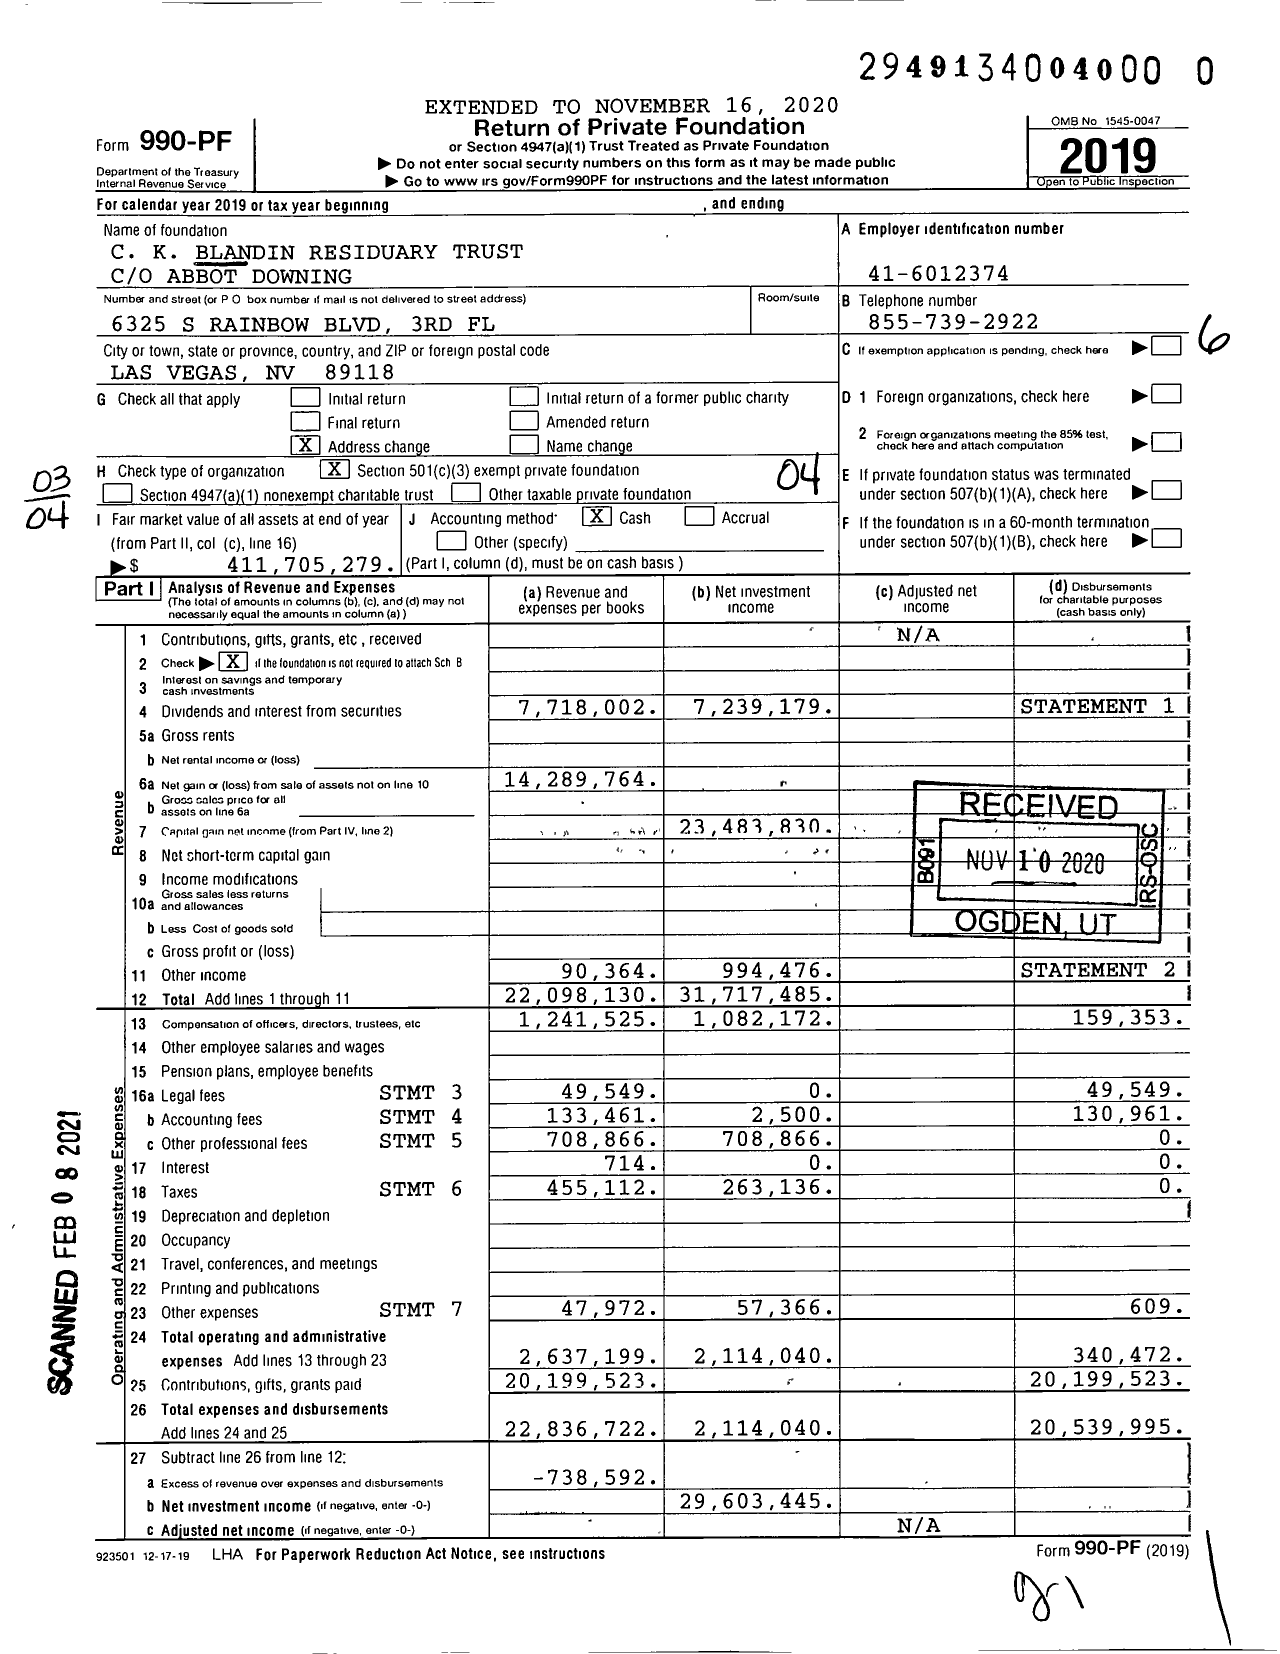 Image of first page of 2019 Form 990PF for Charles K. Blandin Residuary Trust